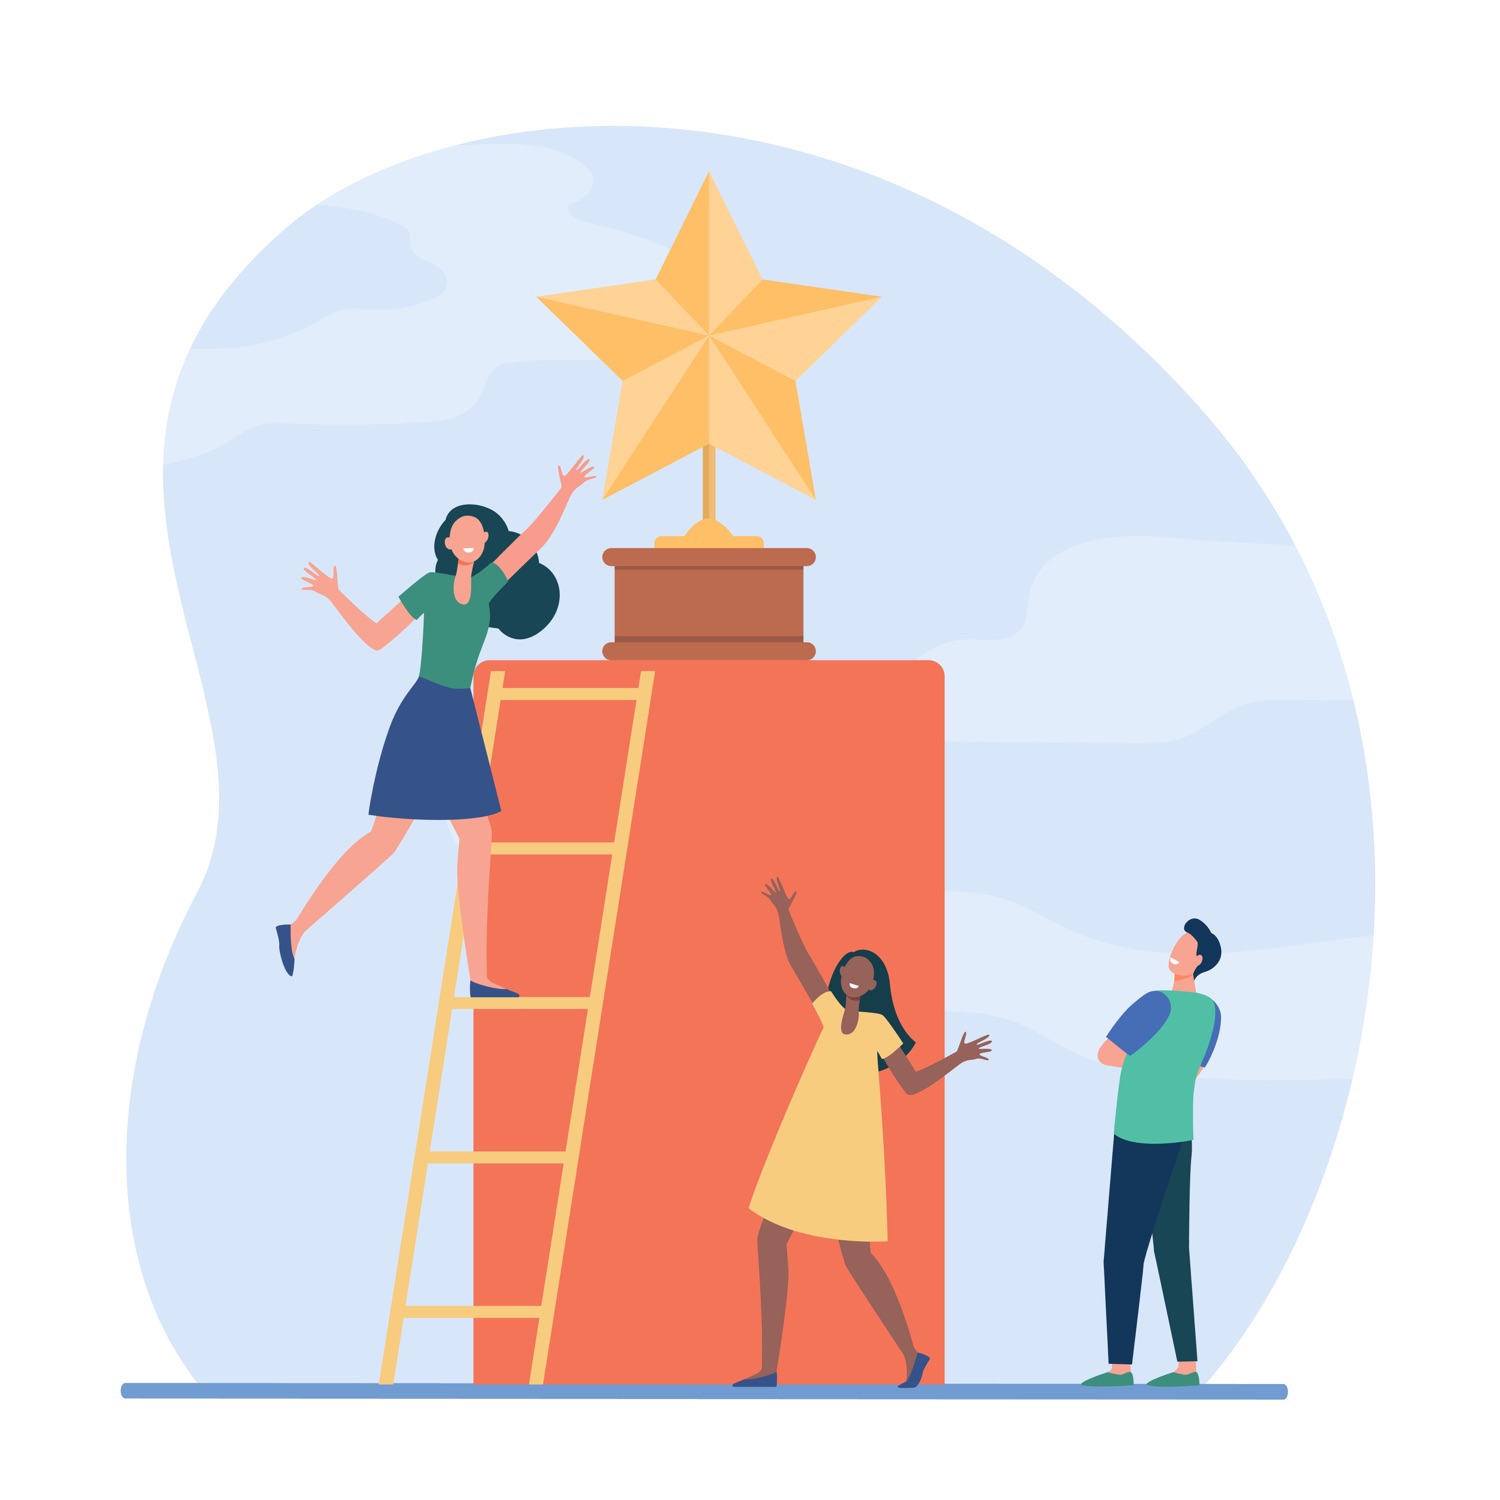 Women climbing a ladder and reaching for a star on a podium while her friends watch